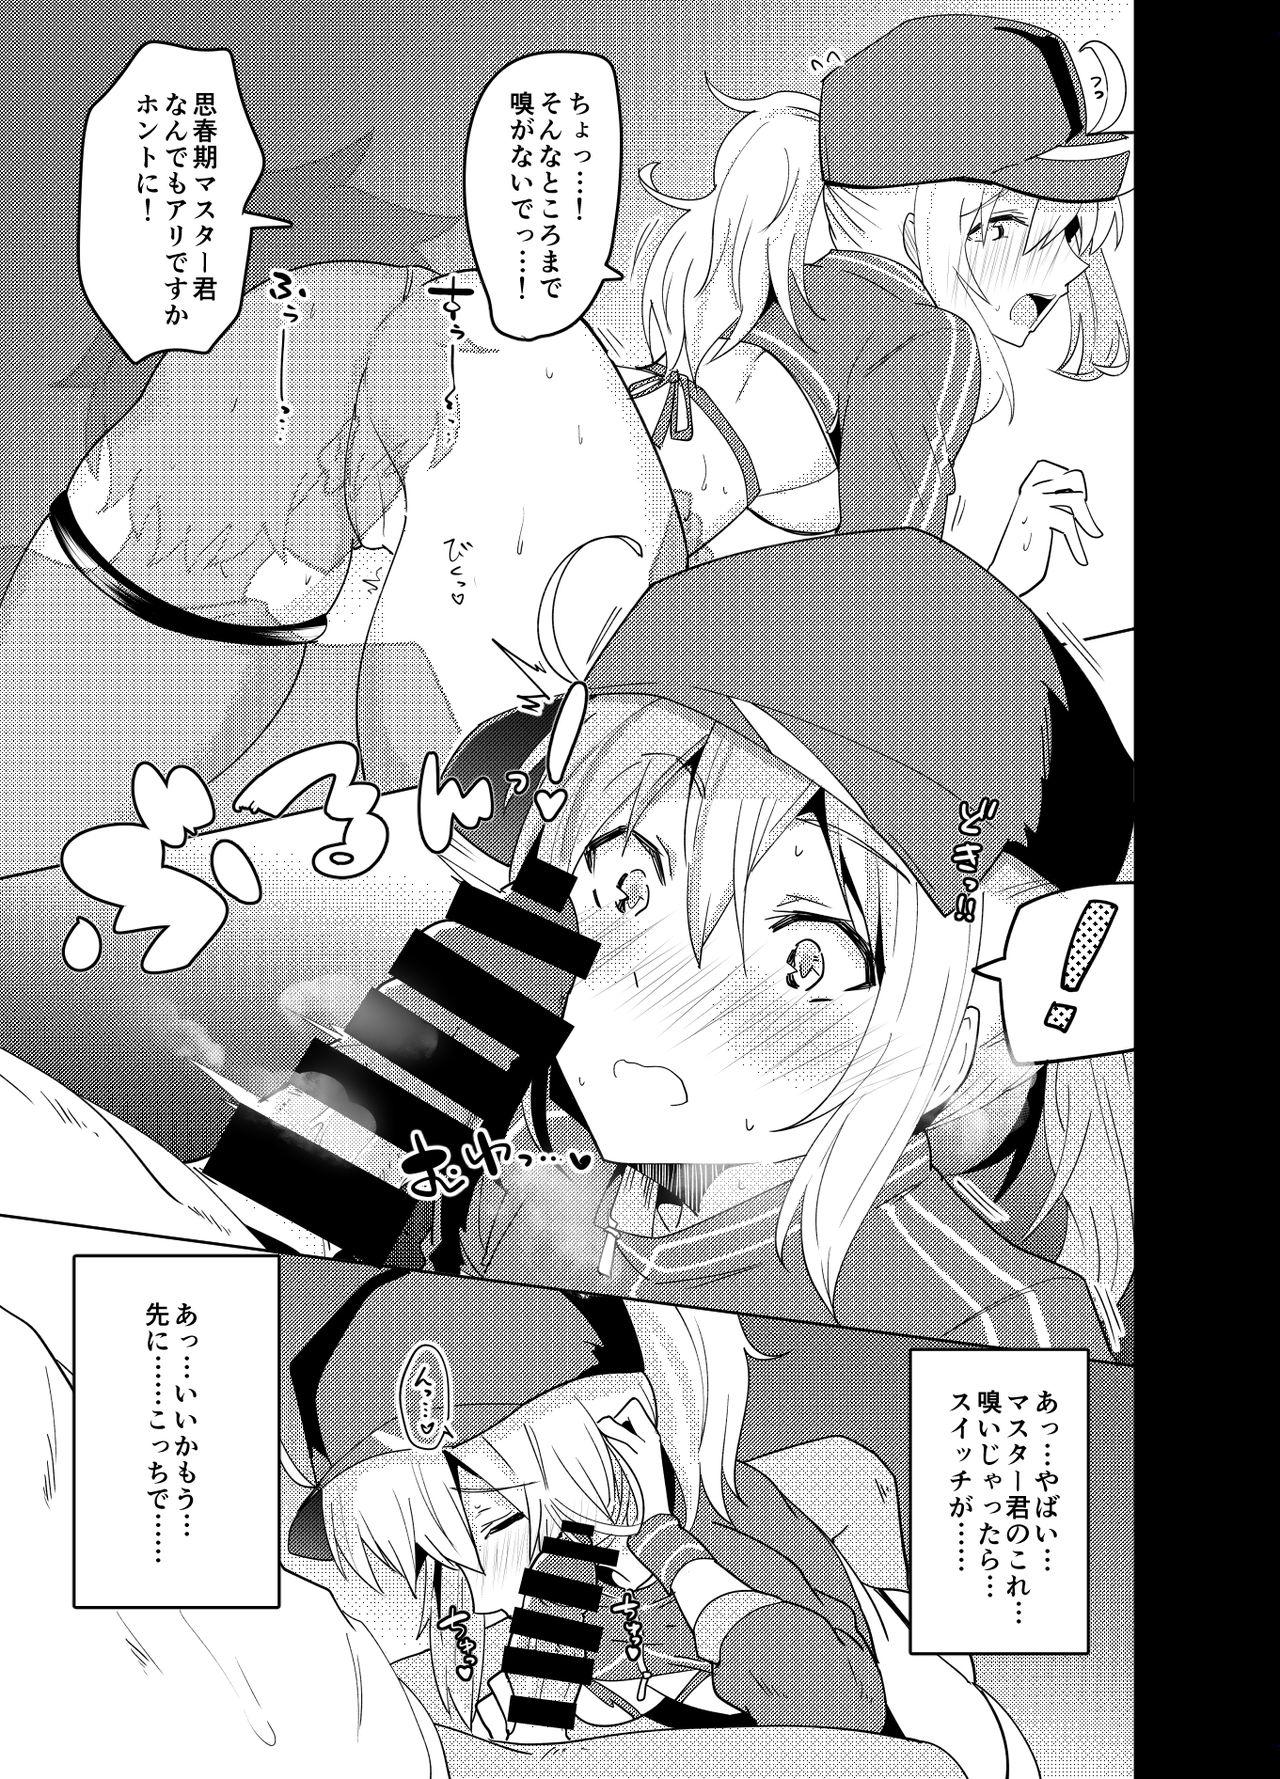 Jeans Dosukebe Saber Wars 3 - Fate grand order Penis Sucking - Page 9